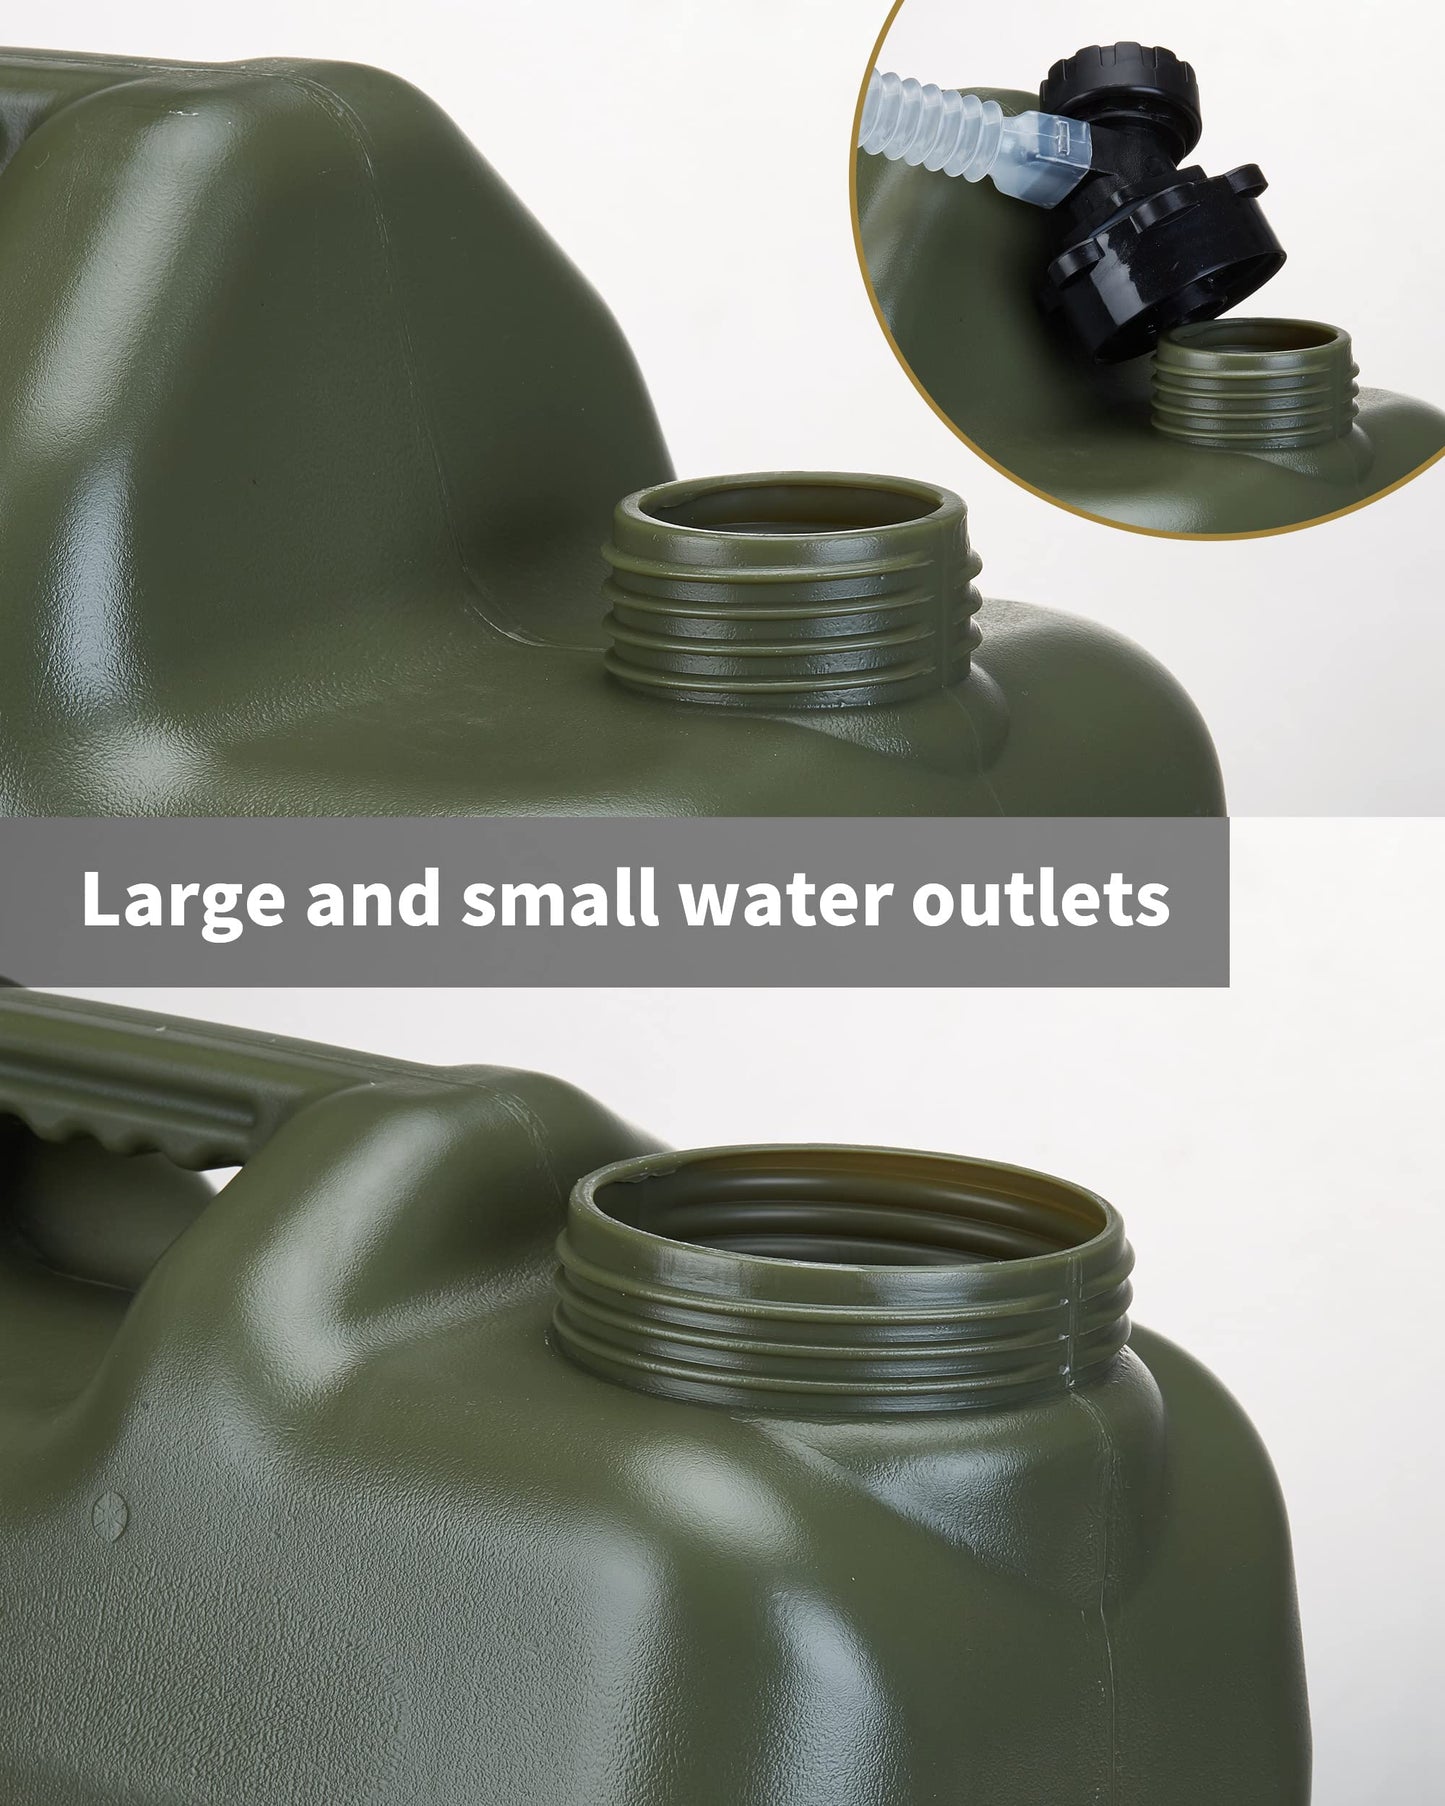 UPWOIGH 5 Gallon Water Jug, Camping Water Container, Truly No Leakage Water Storage, Large Military Green Water Tank,BPA Free Portable Emergency Overlanding Gear for Outdoors Hiking